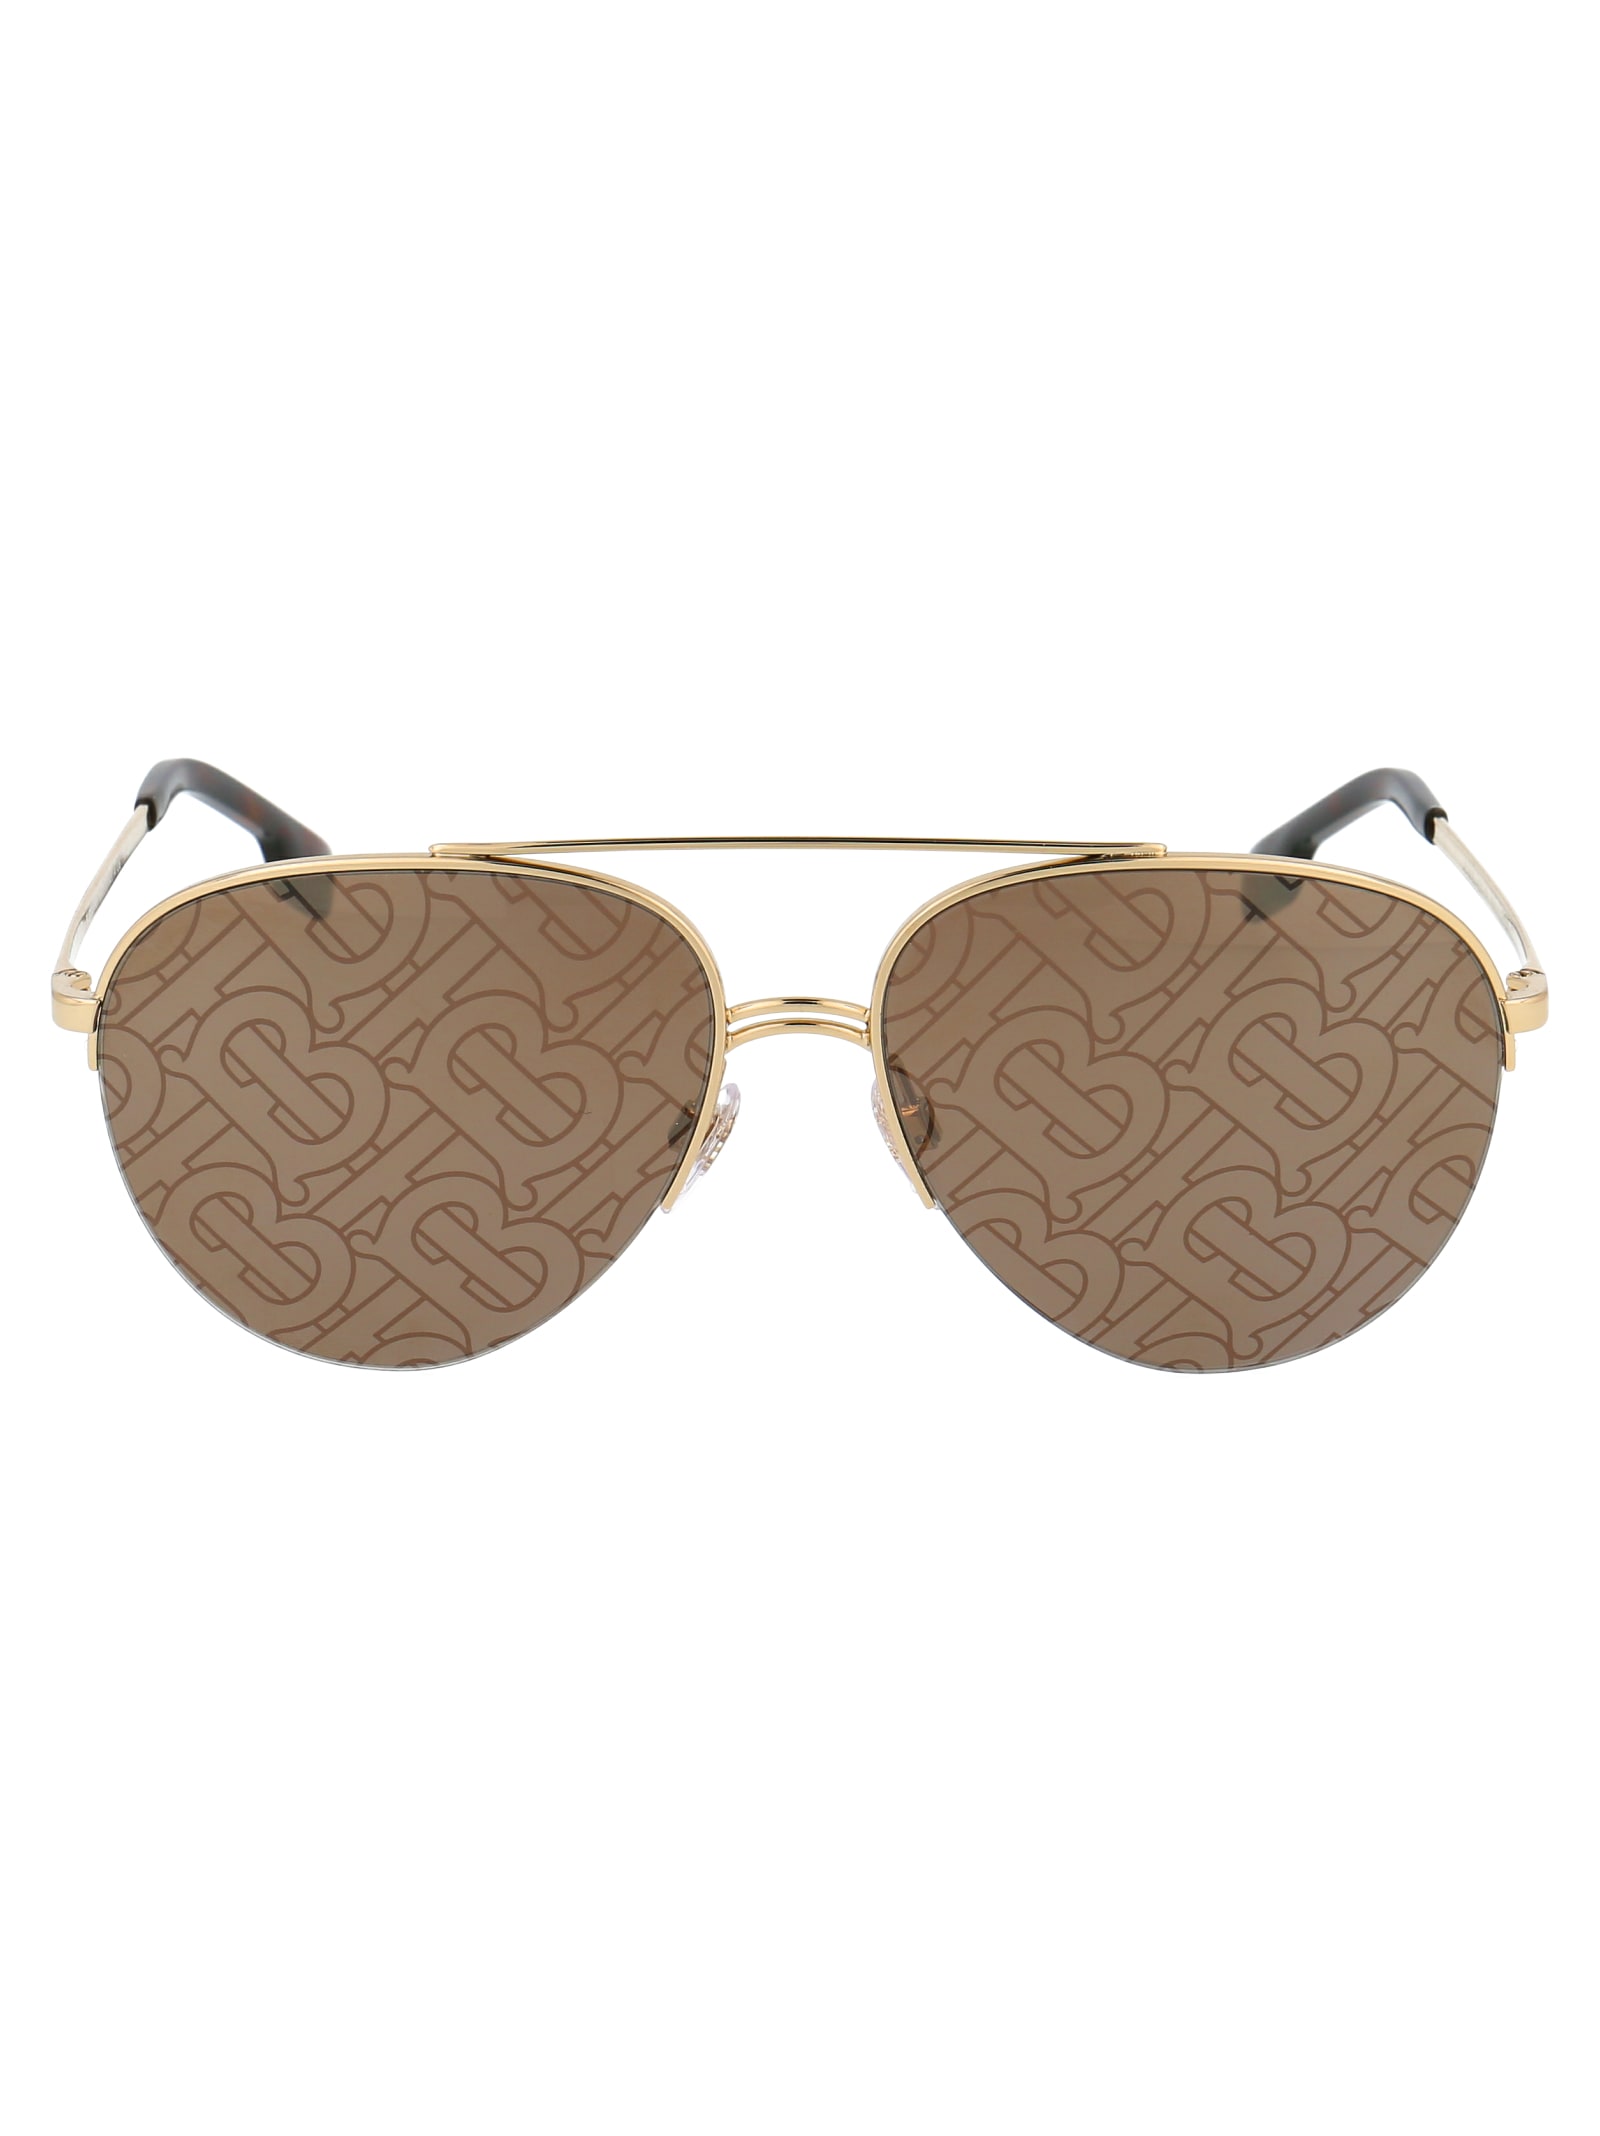 Burberry Ferry Sunglasses In 1017p2 Gold